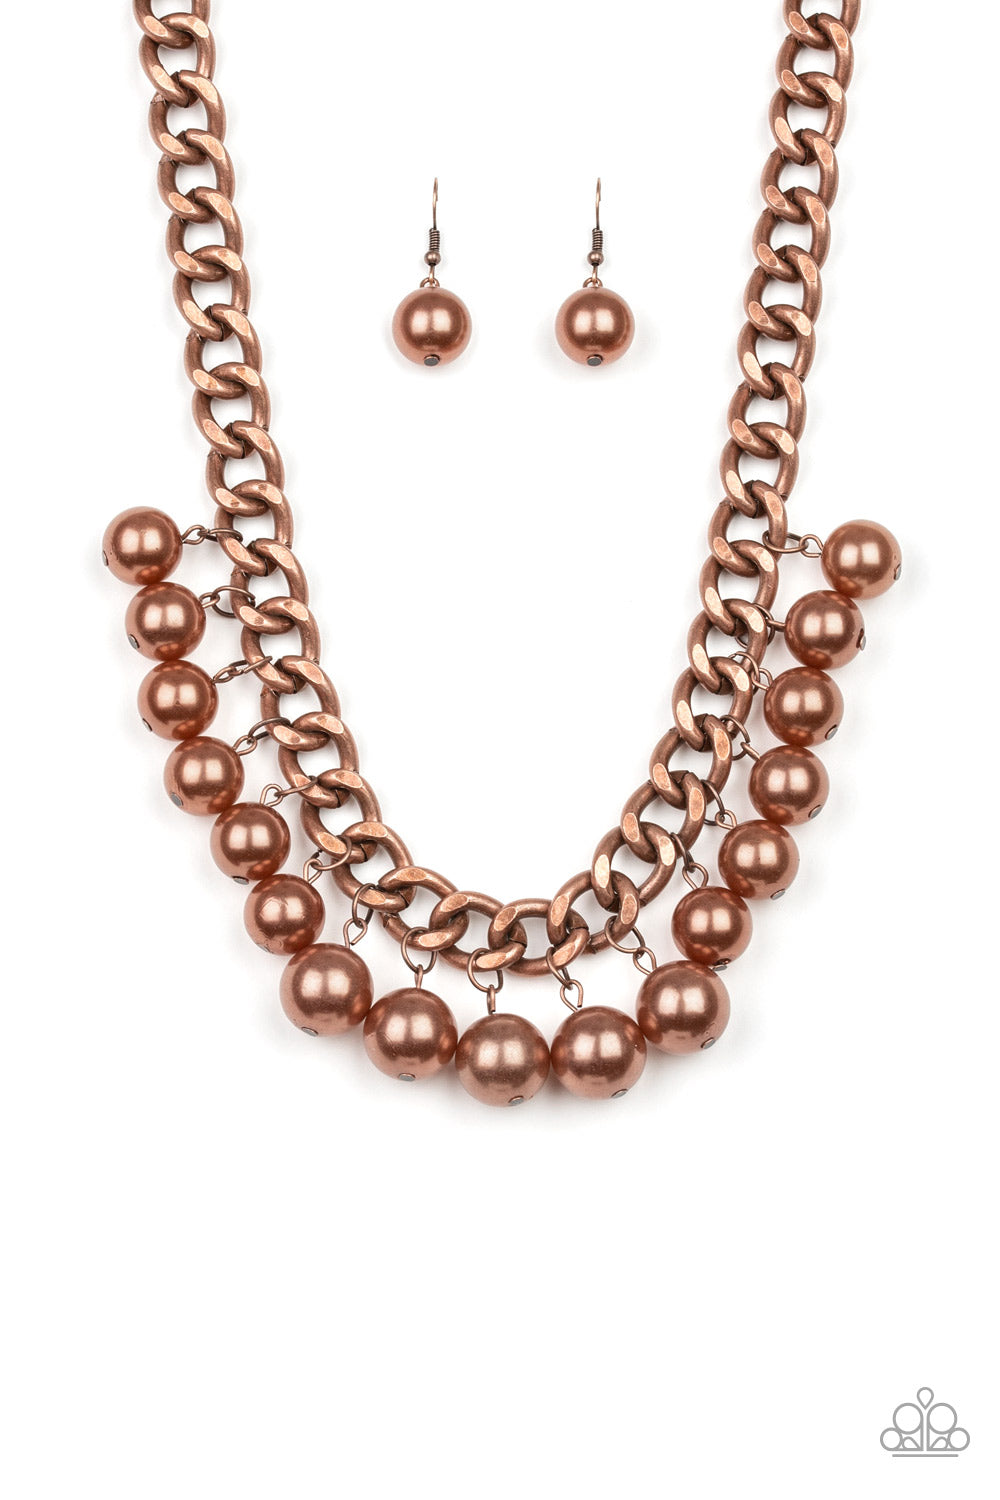 Paparazzi ~ Get Off My Runway - Copper Necklace Set